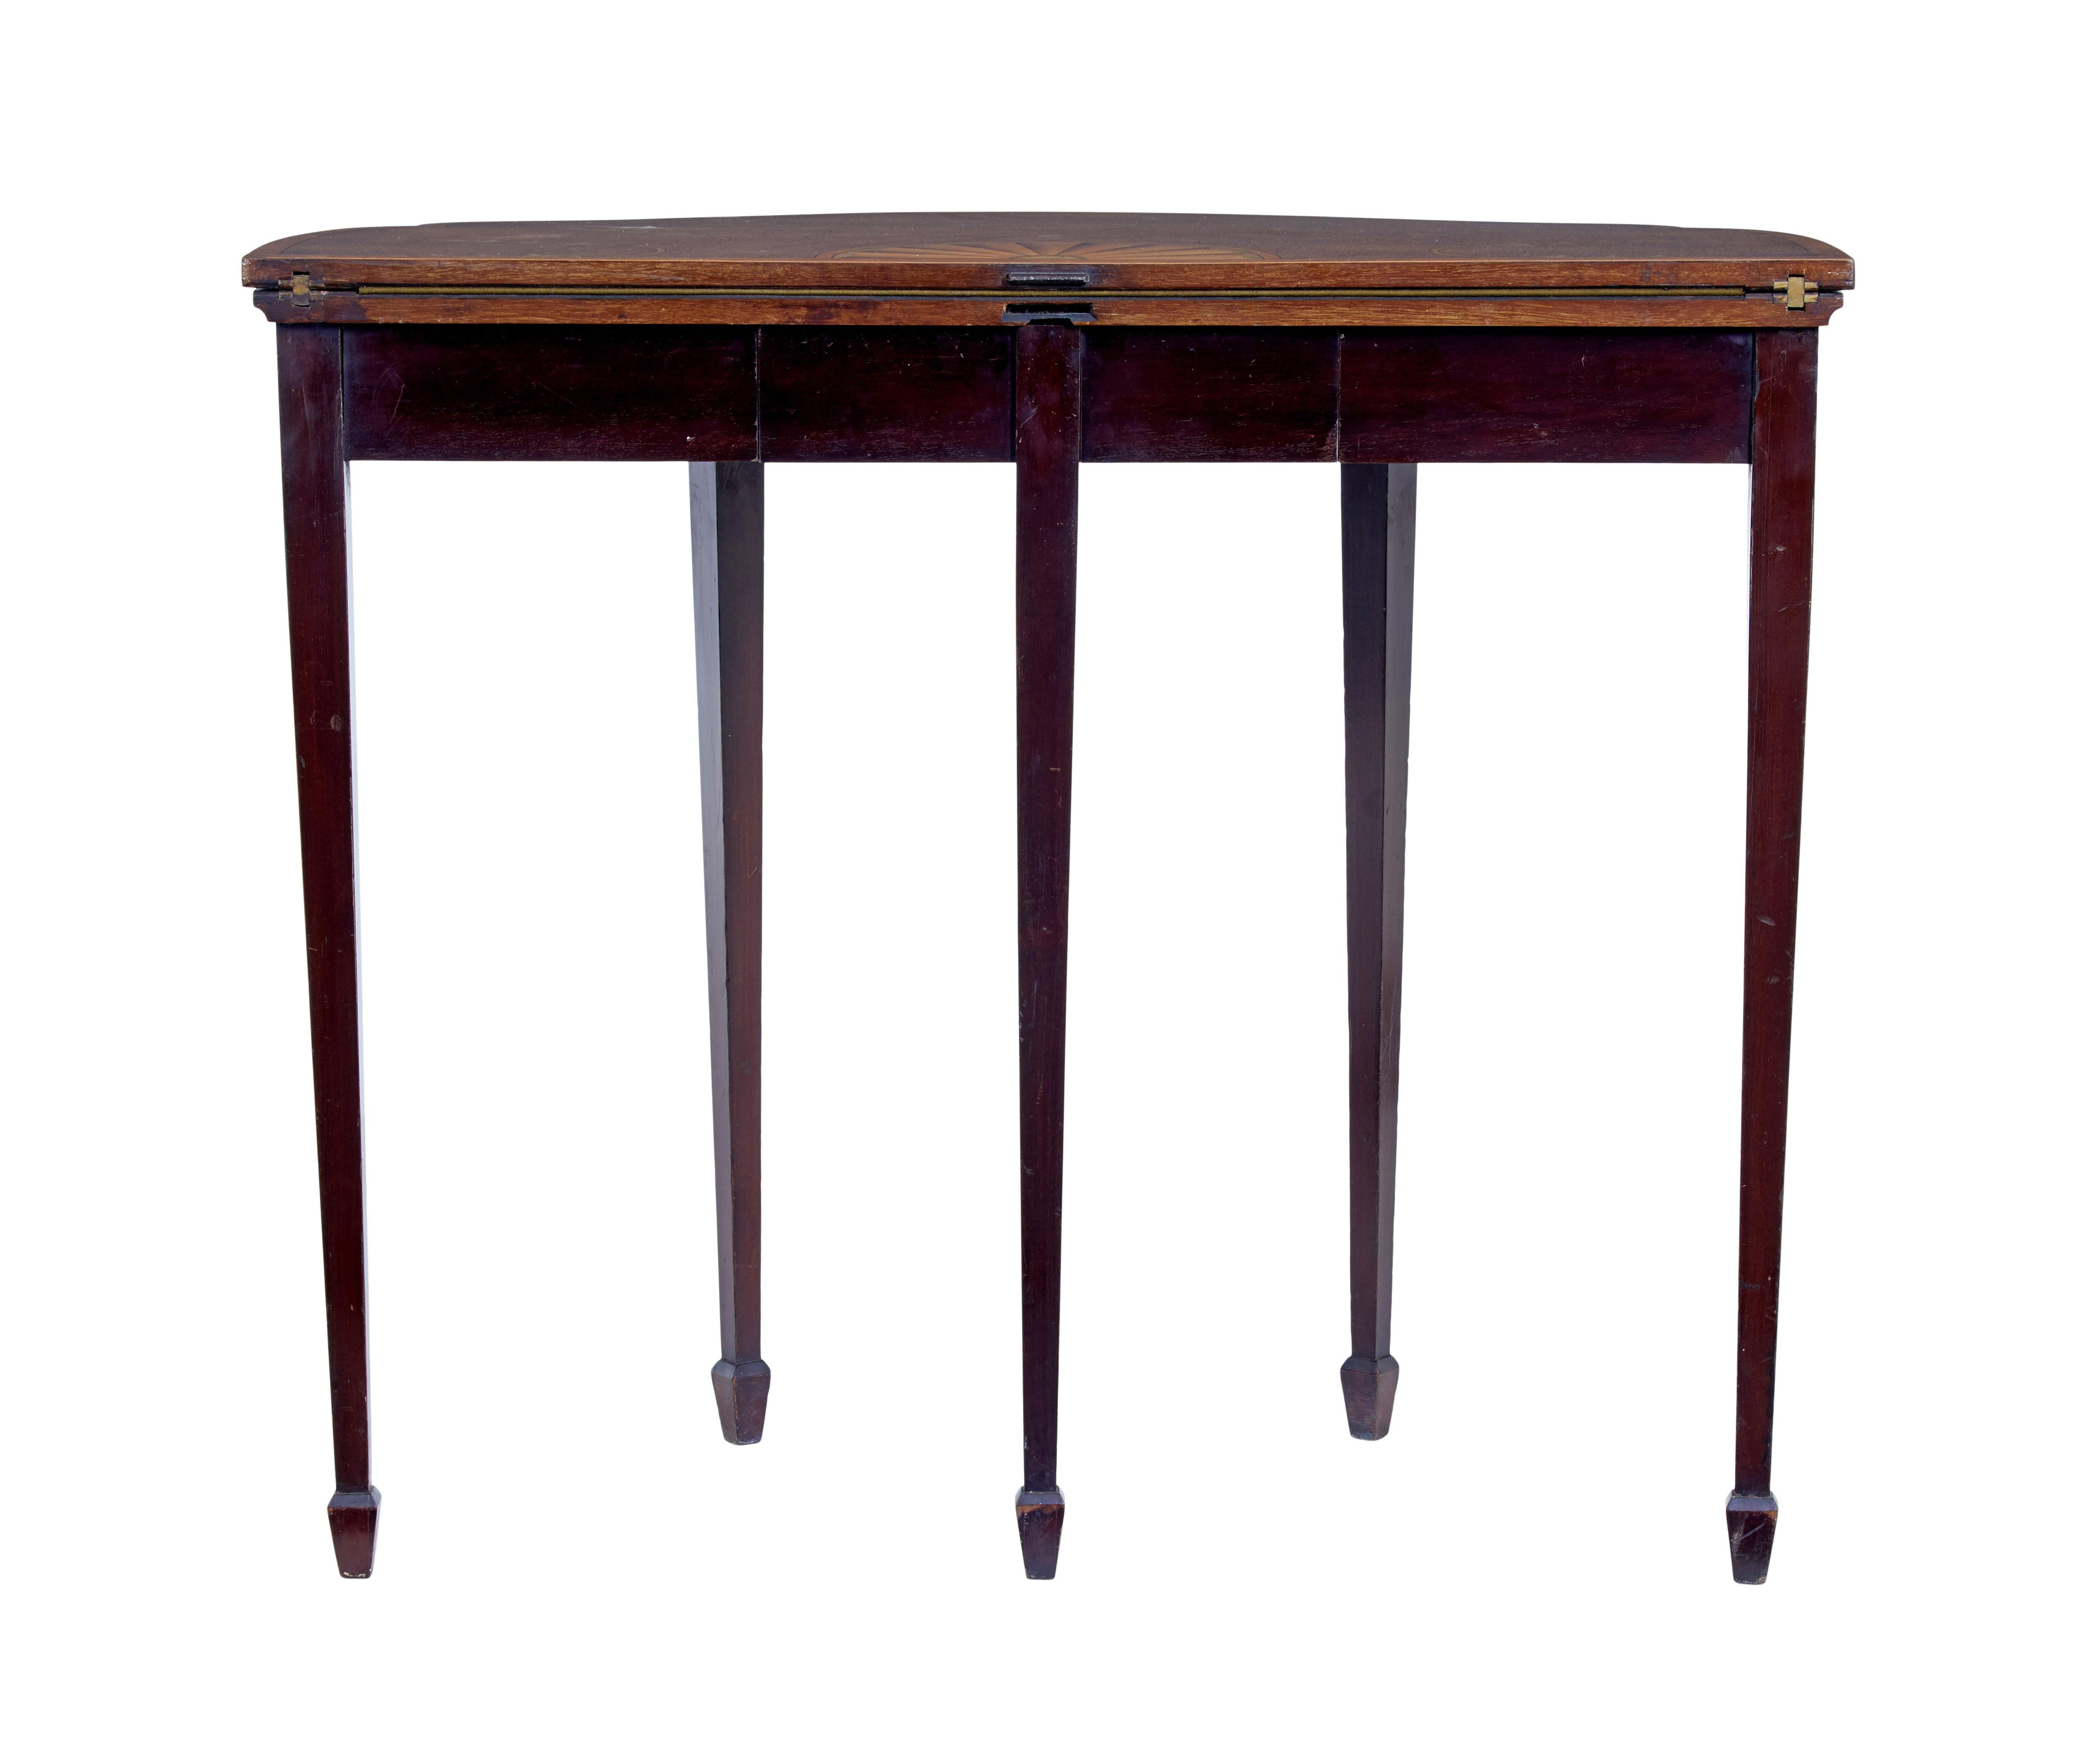 19th century Sheraton revival inlaid mahogany card table For Sale 2